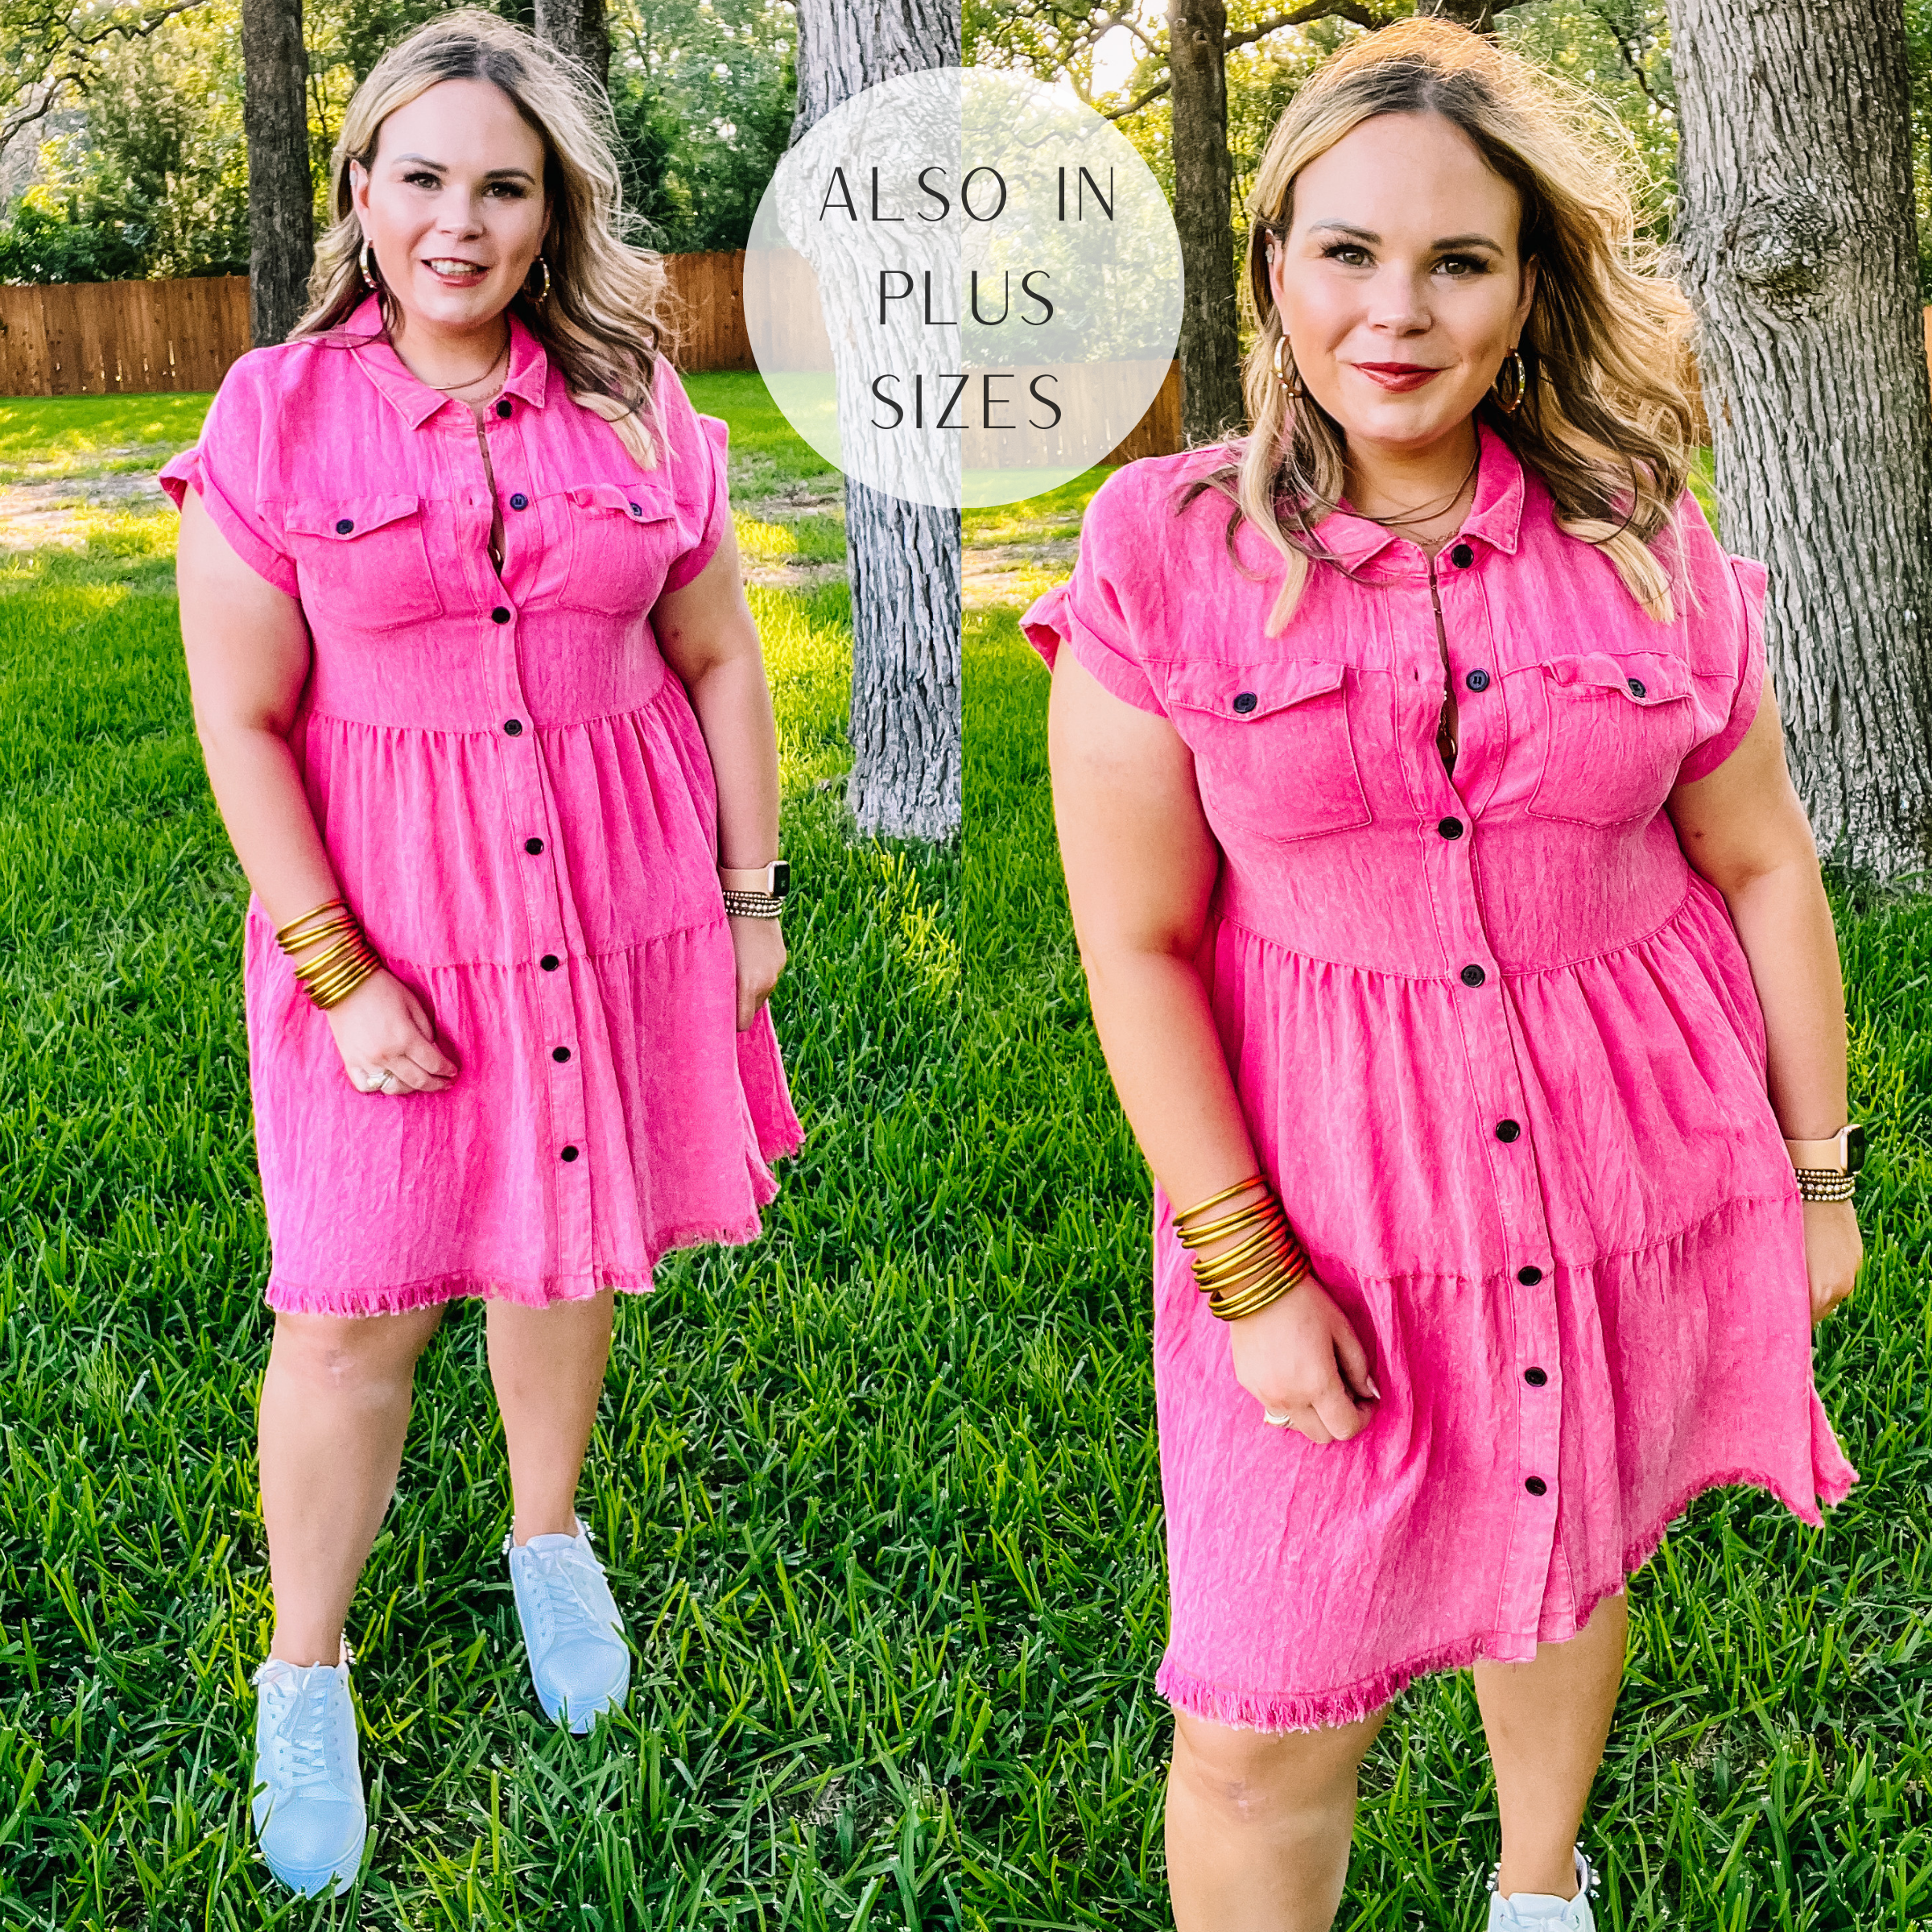 Model is wearing a pink button up dress that has a collared neckline. Model has it paired with gold jewelry and white sneakers.